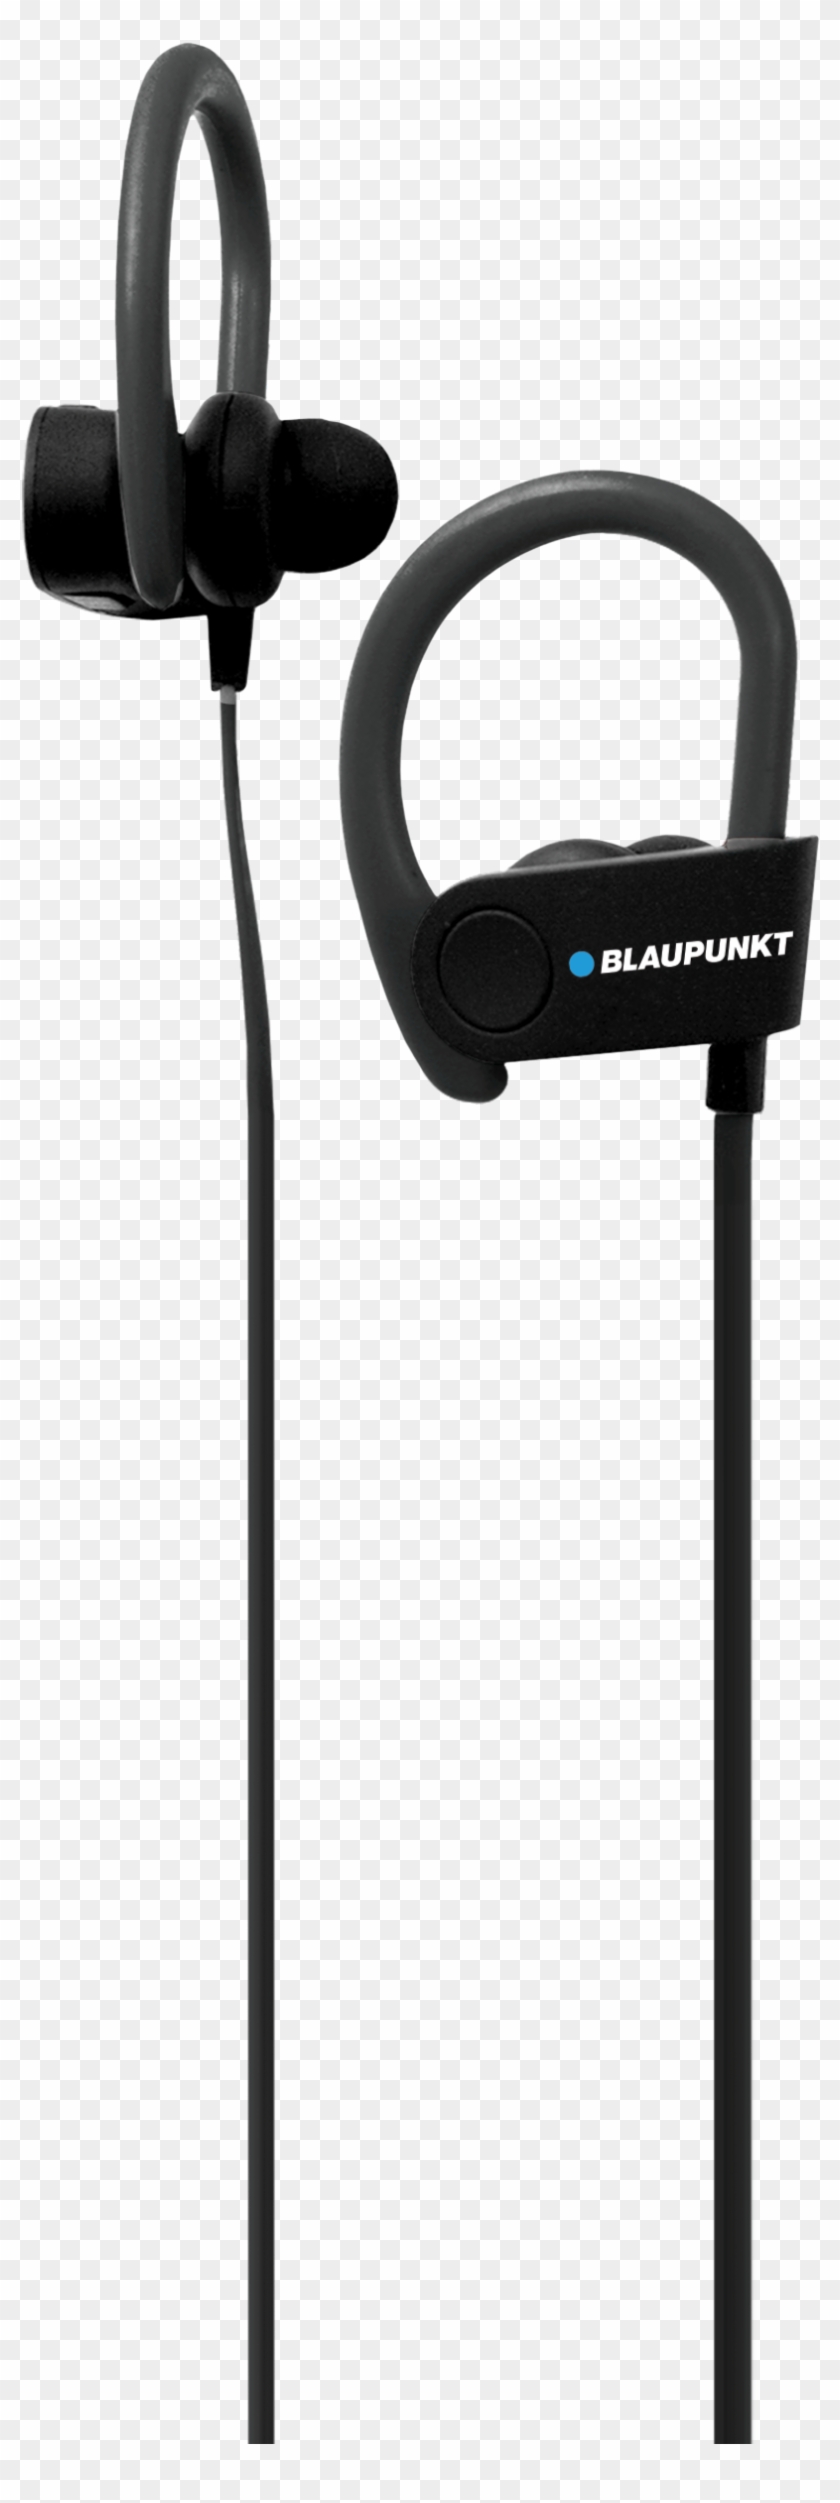 Black Wired Earbuds - Billboard Bluetooth Earbuds Clipart #3992154